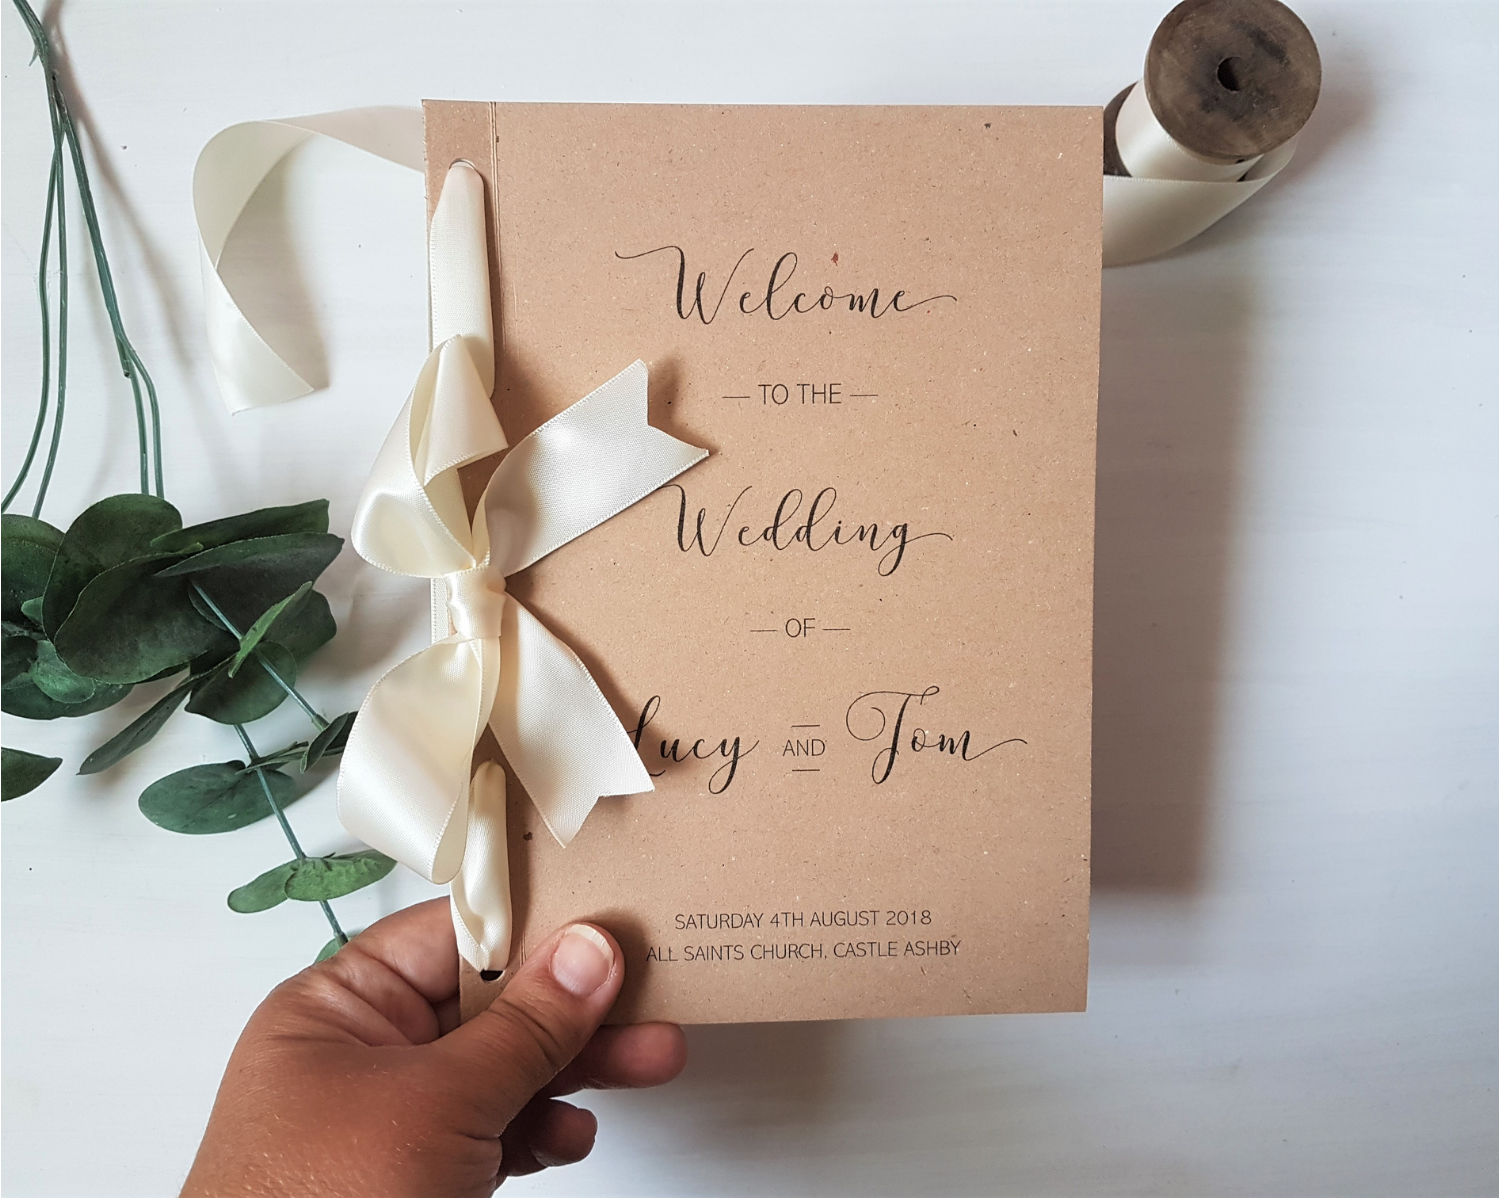 Size of the rustic kraft brown A5 Poppleberry folded wedding order of service card compared to the size of a hand.